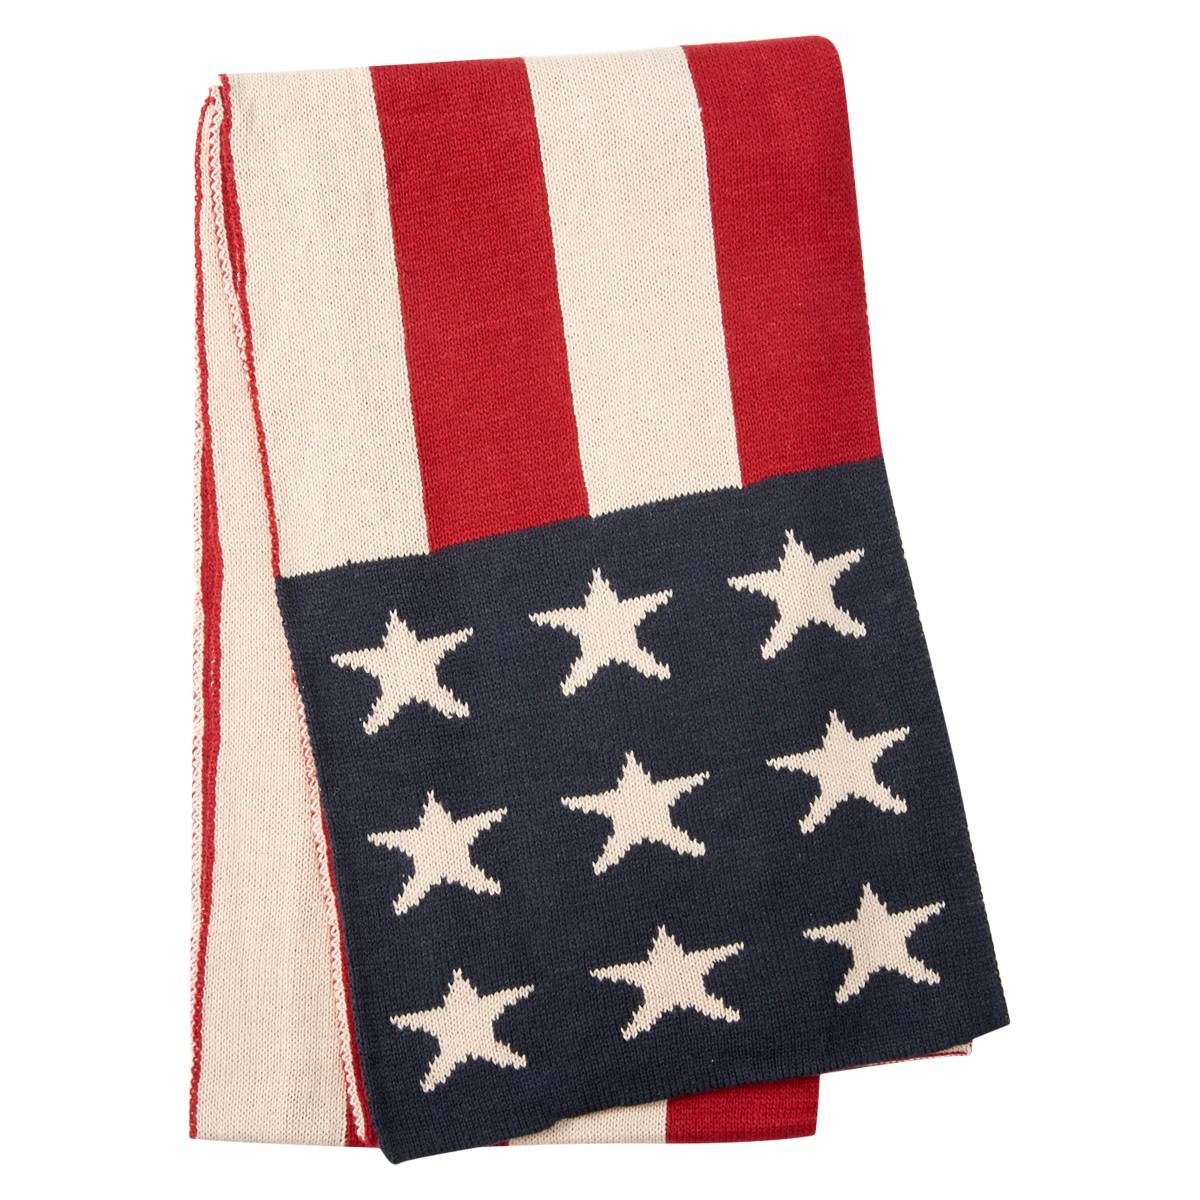 Mens Altare American Flag Knit Scarf